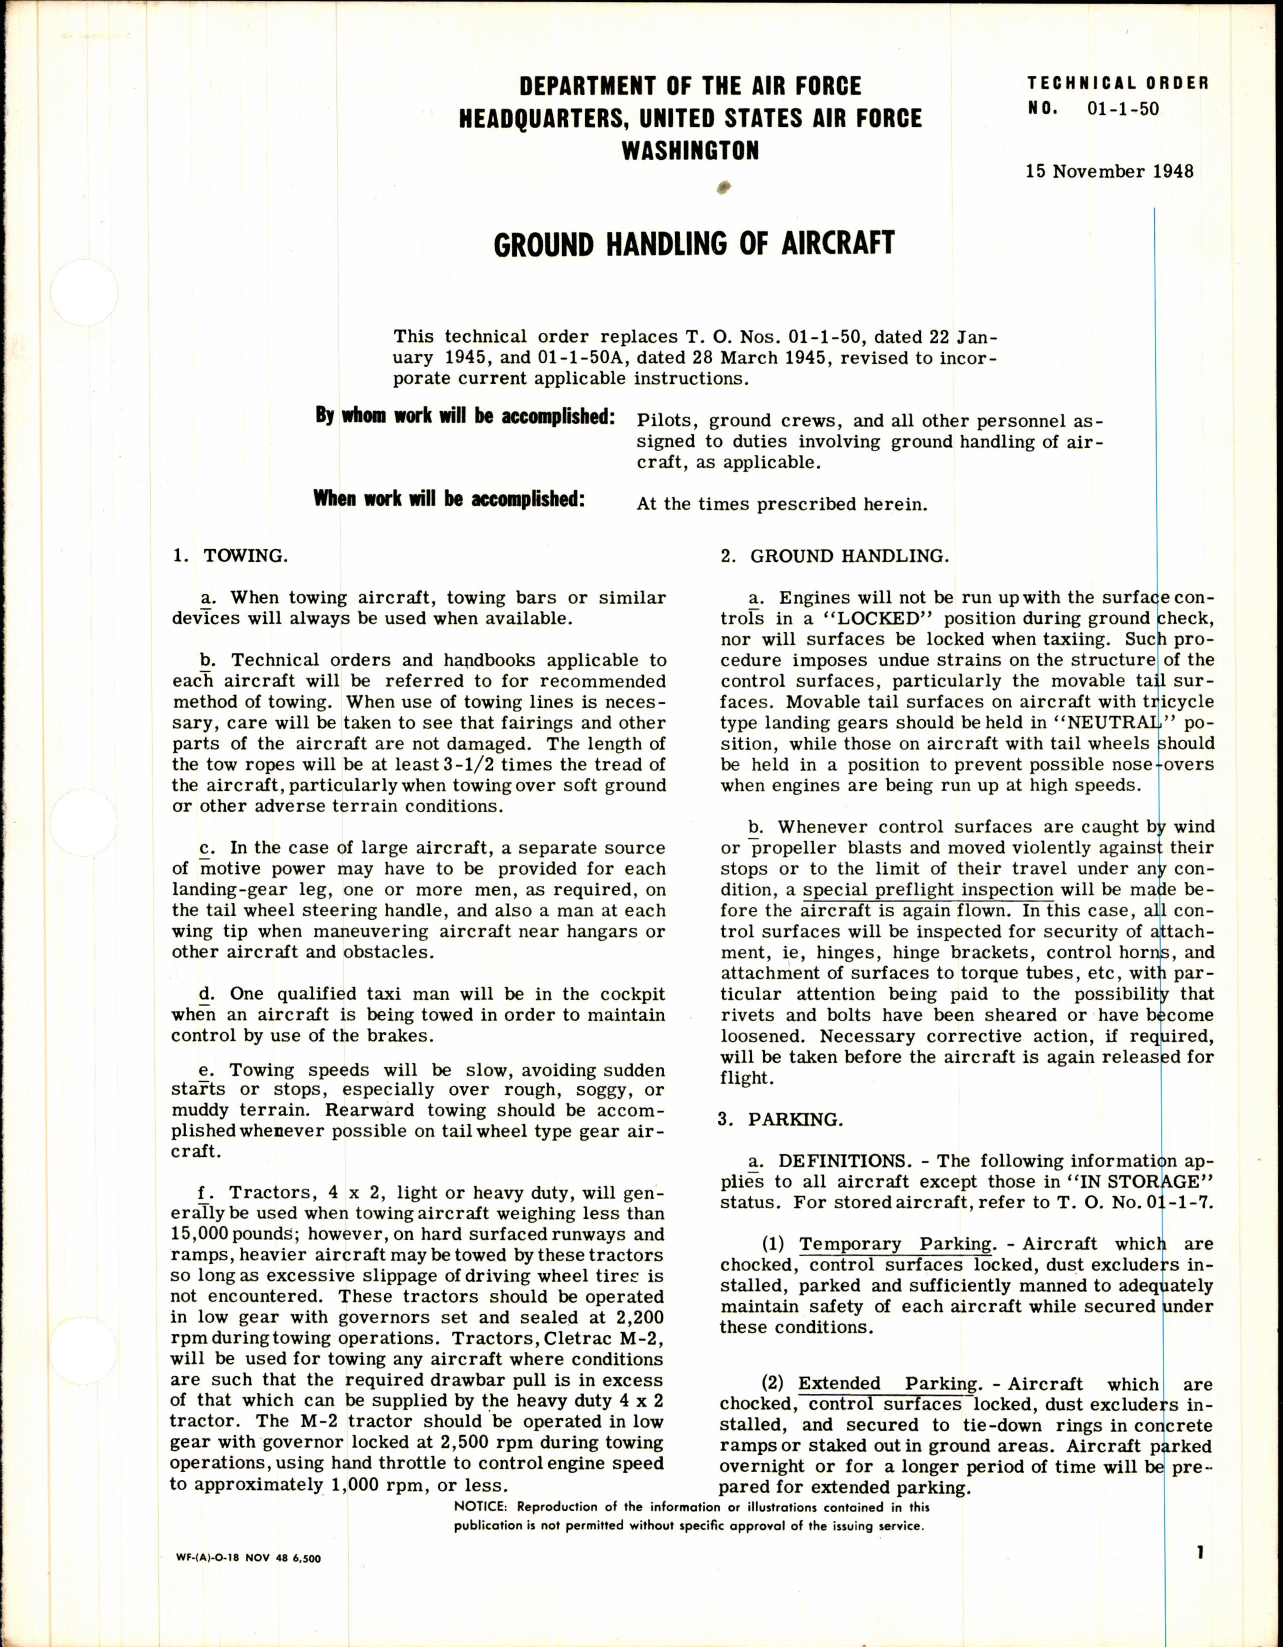 Sample page 1 from AirCorps Library document: Ground Handling of Aircraft